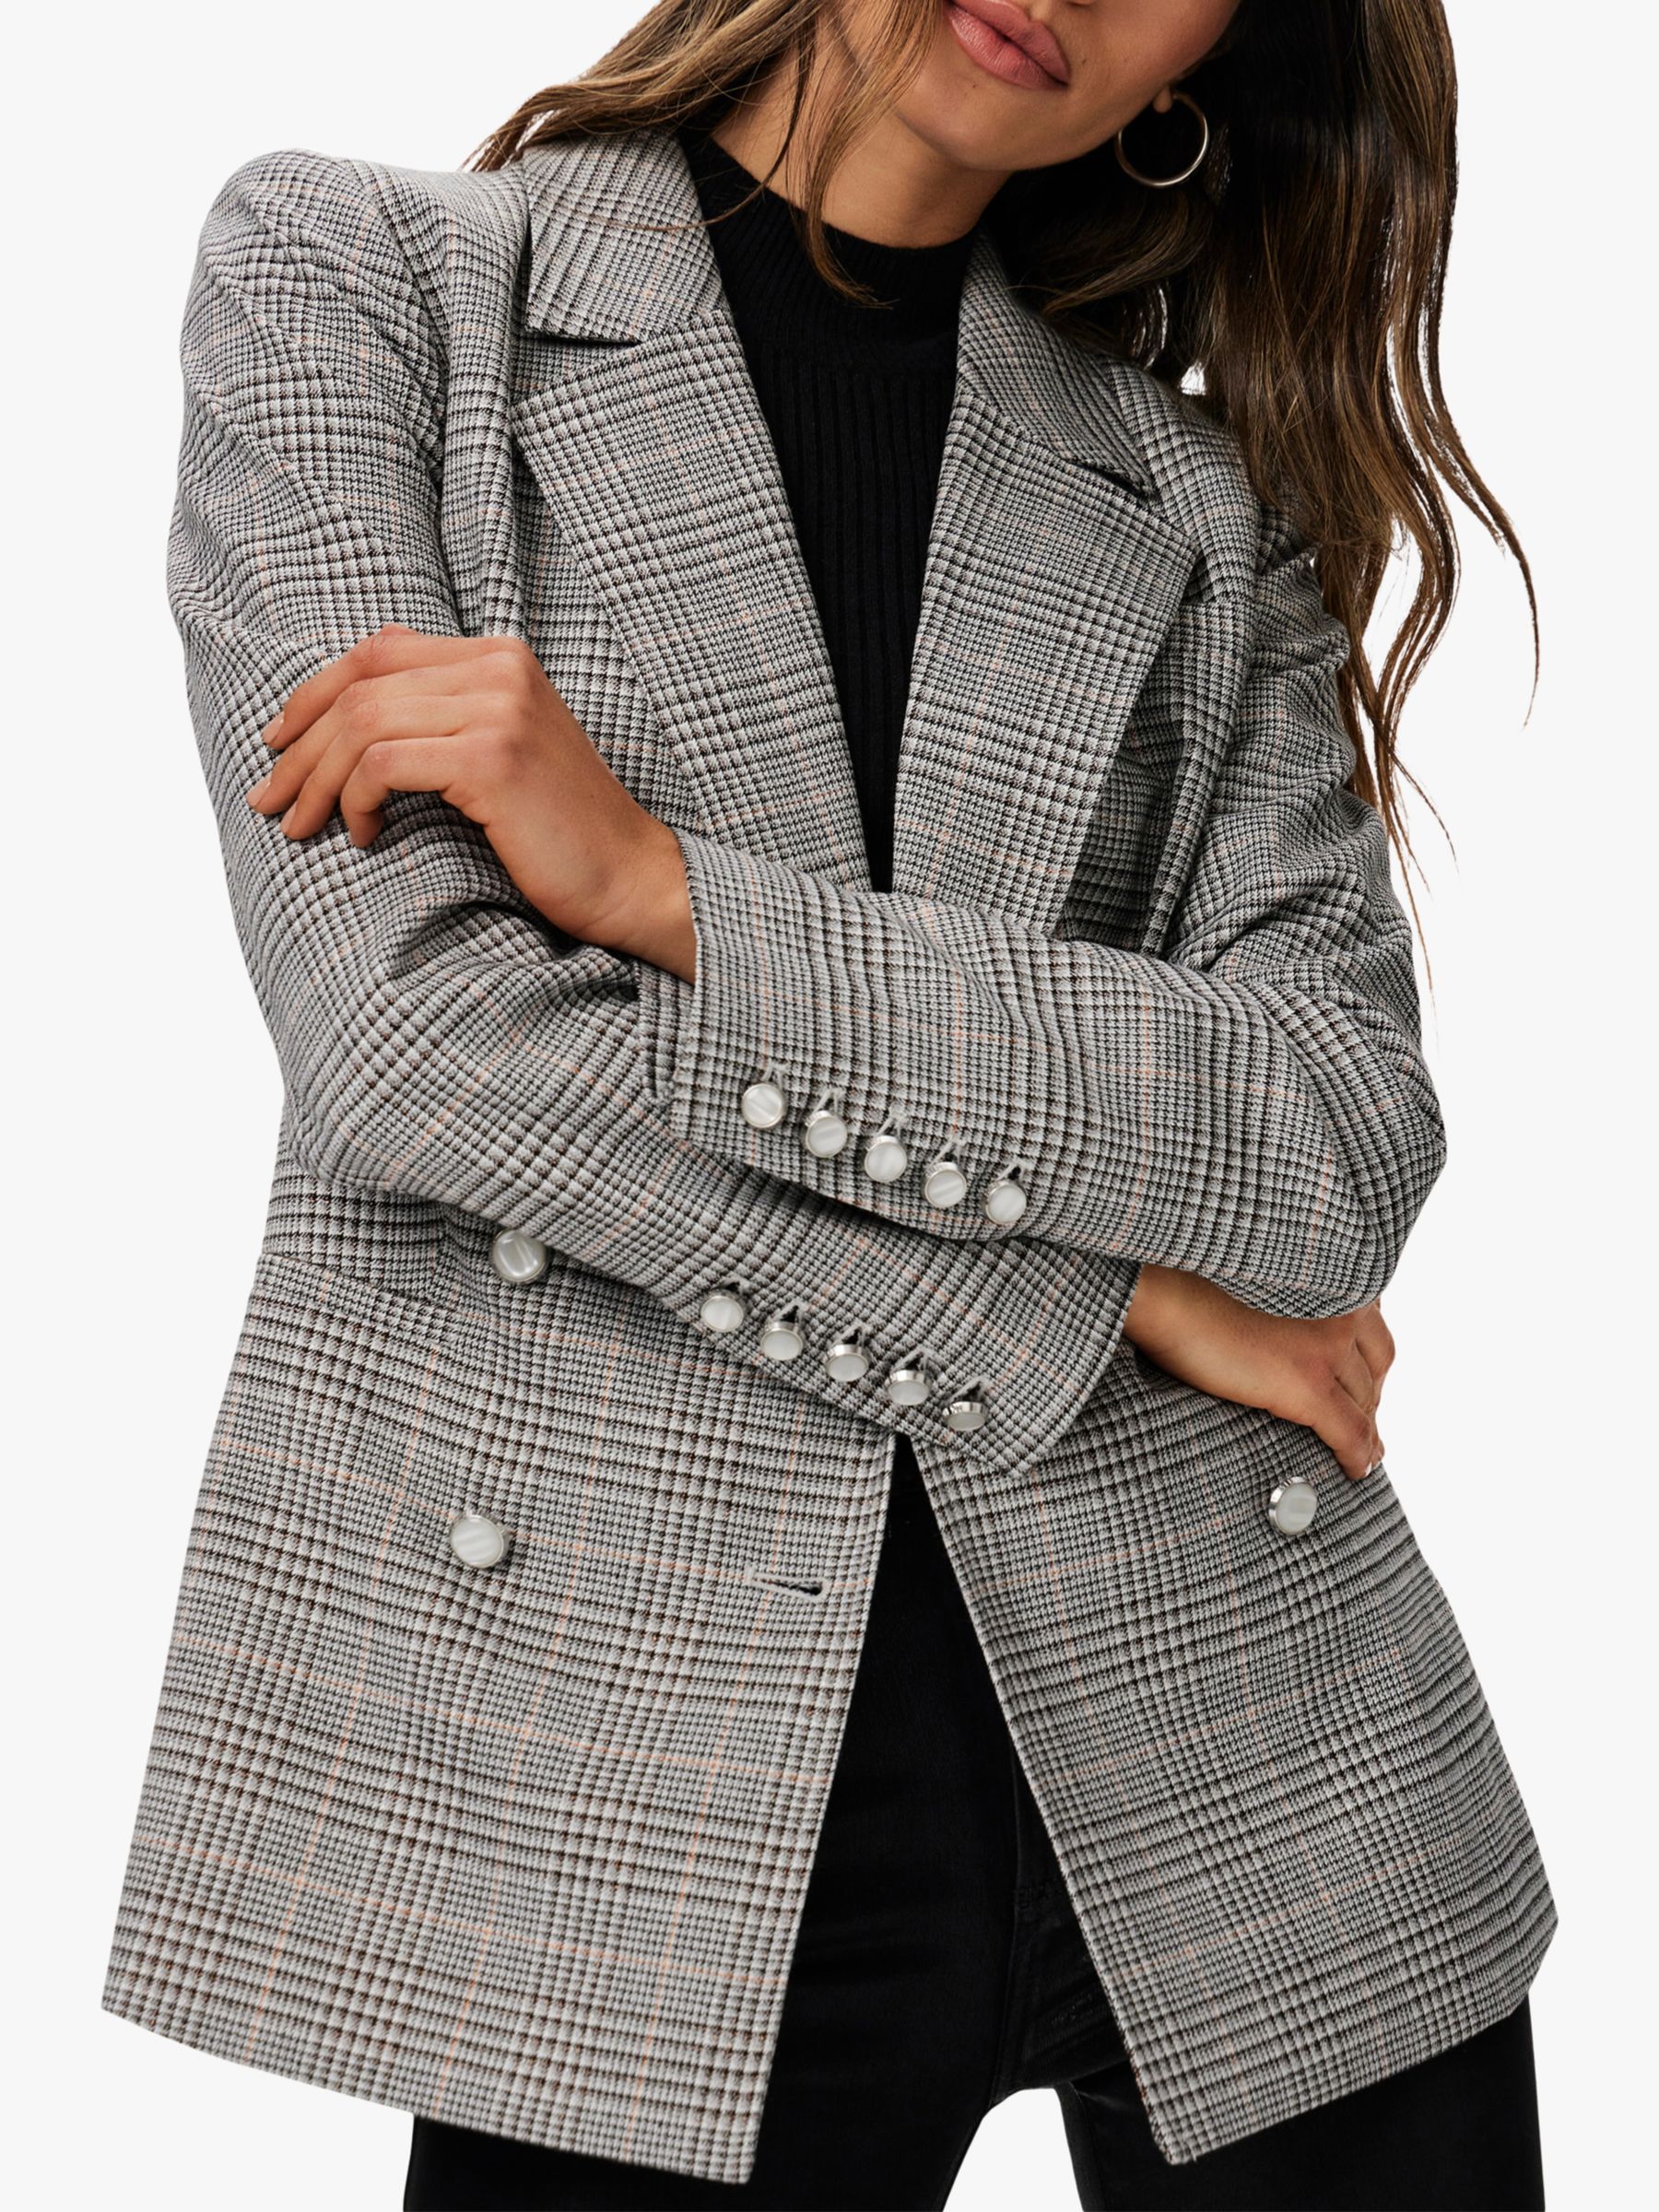 Buy PAIGE Hollie Double Breasted Blazer, Grey/Multi Online at johnlewis.com